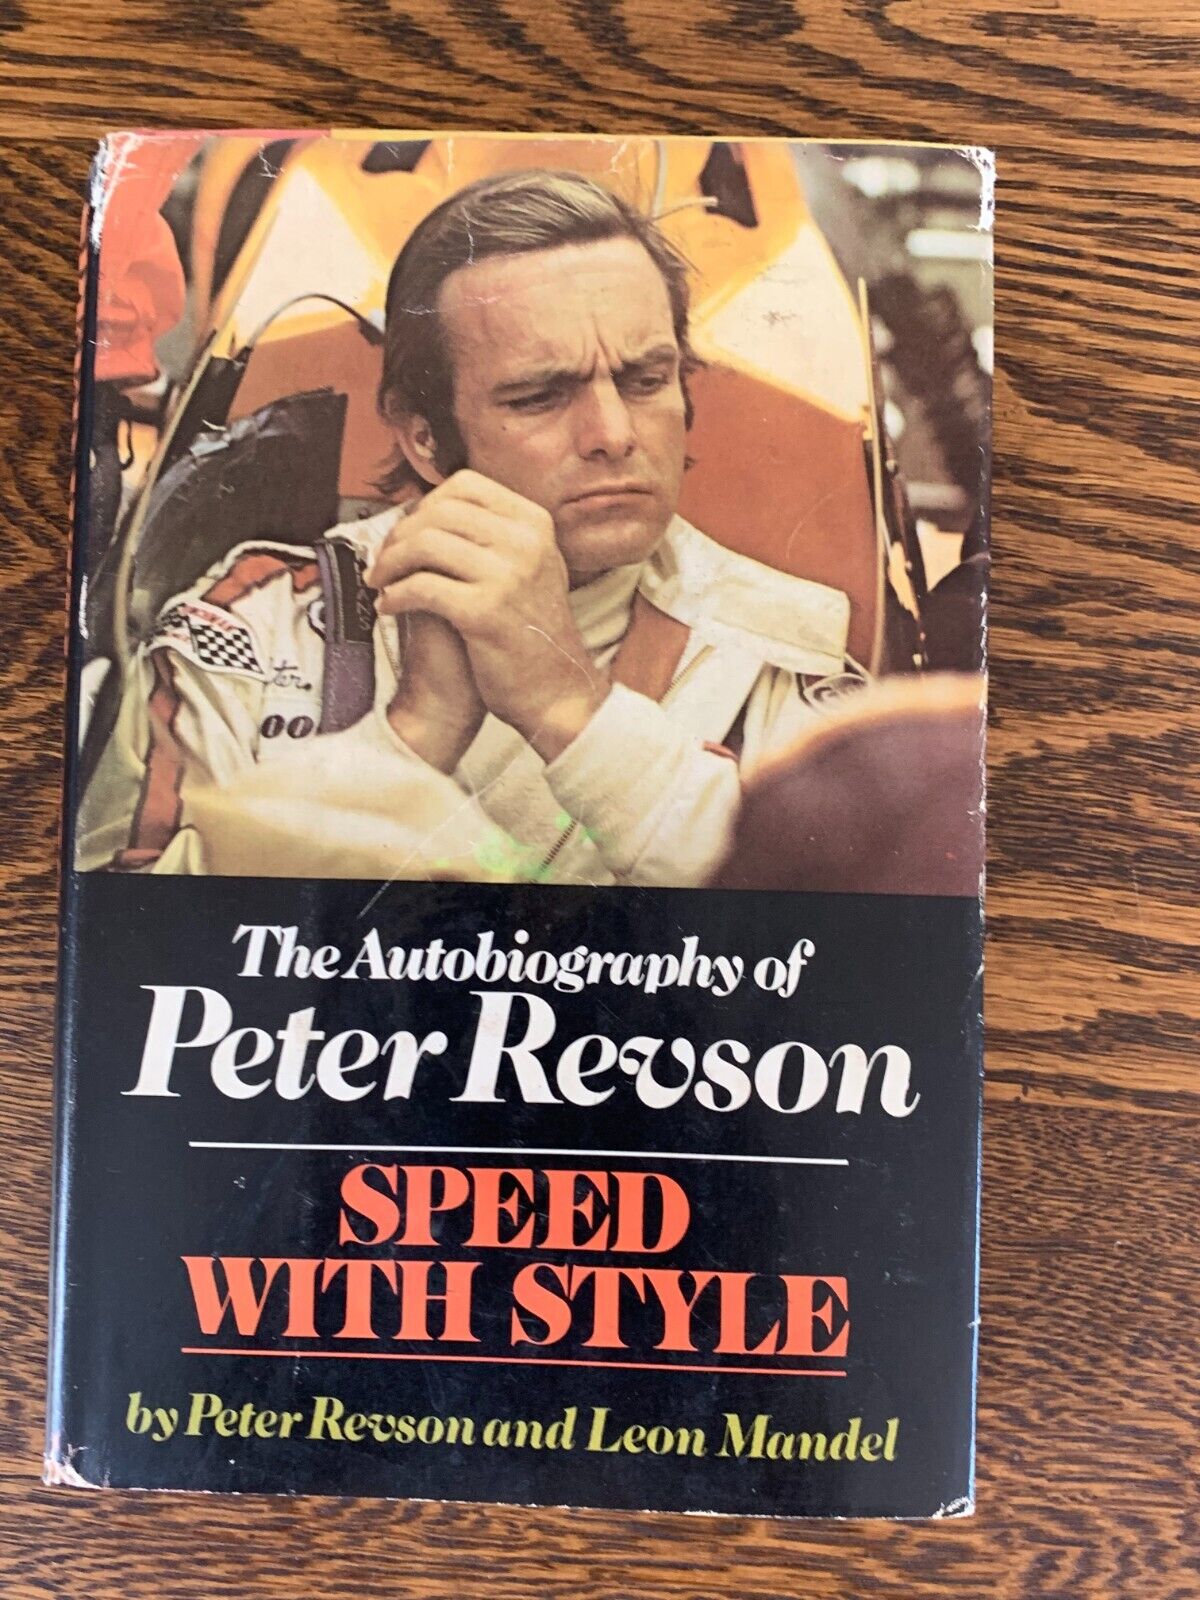 The Autobiography of Peter Revson Speed with Style by Peter Revson